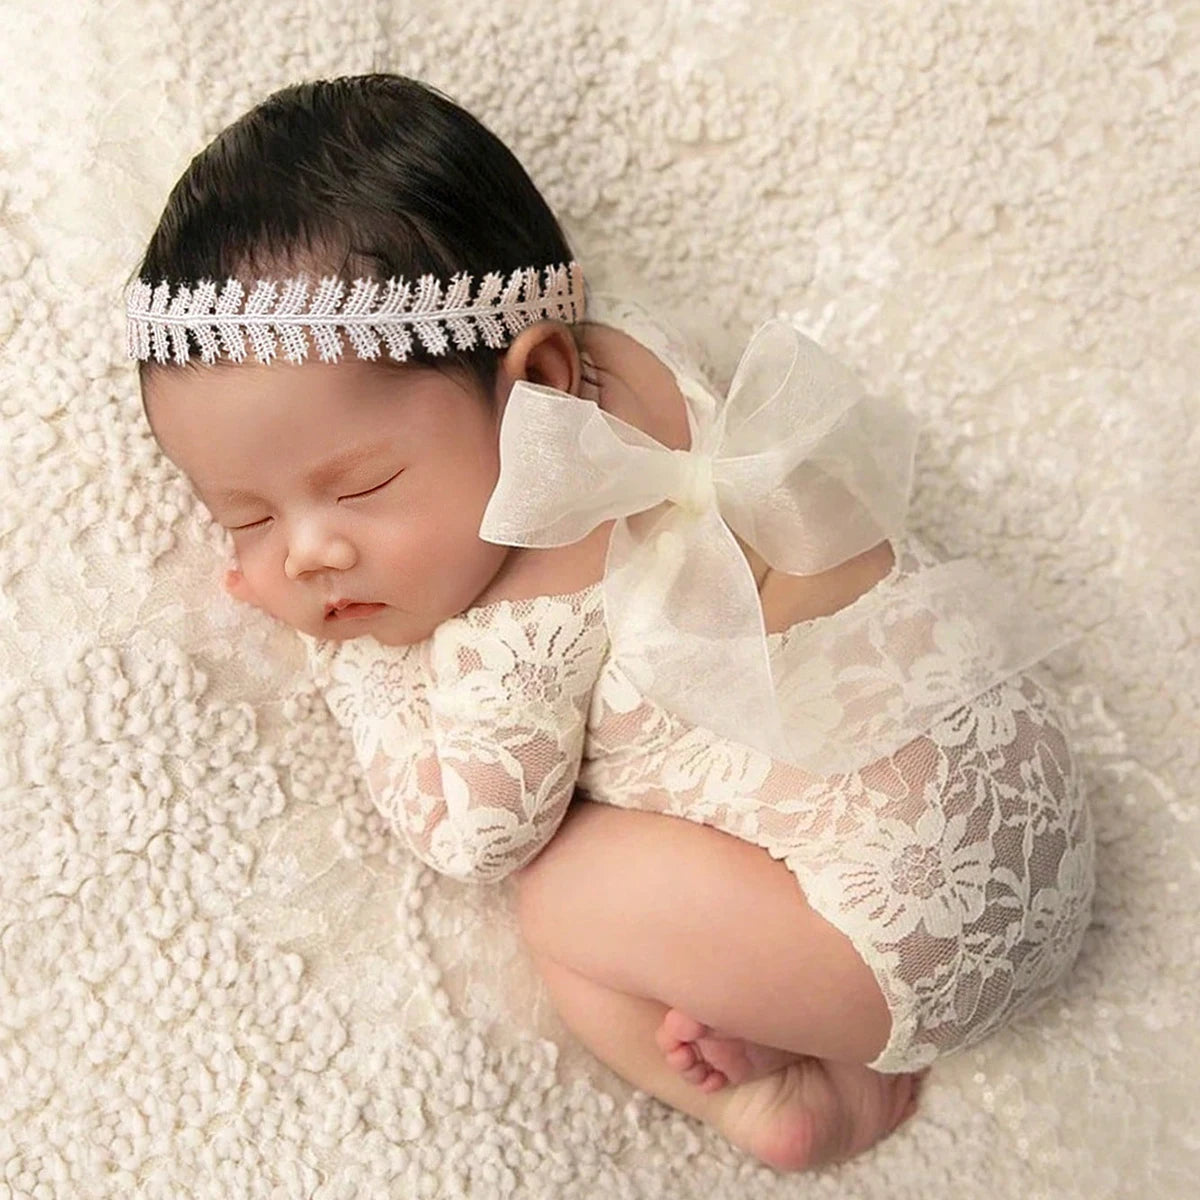 Ylsteed 2 Pieces Set Newborn Lace Romper Infant Photography Outfits with Matching Headband Baby Girl Photo Shooting Props